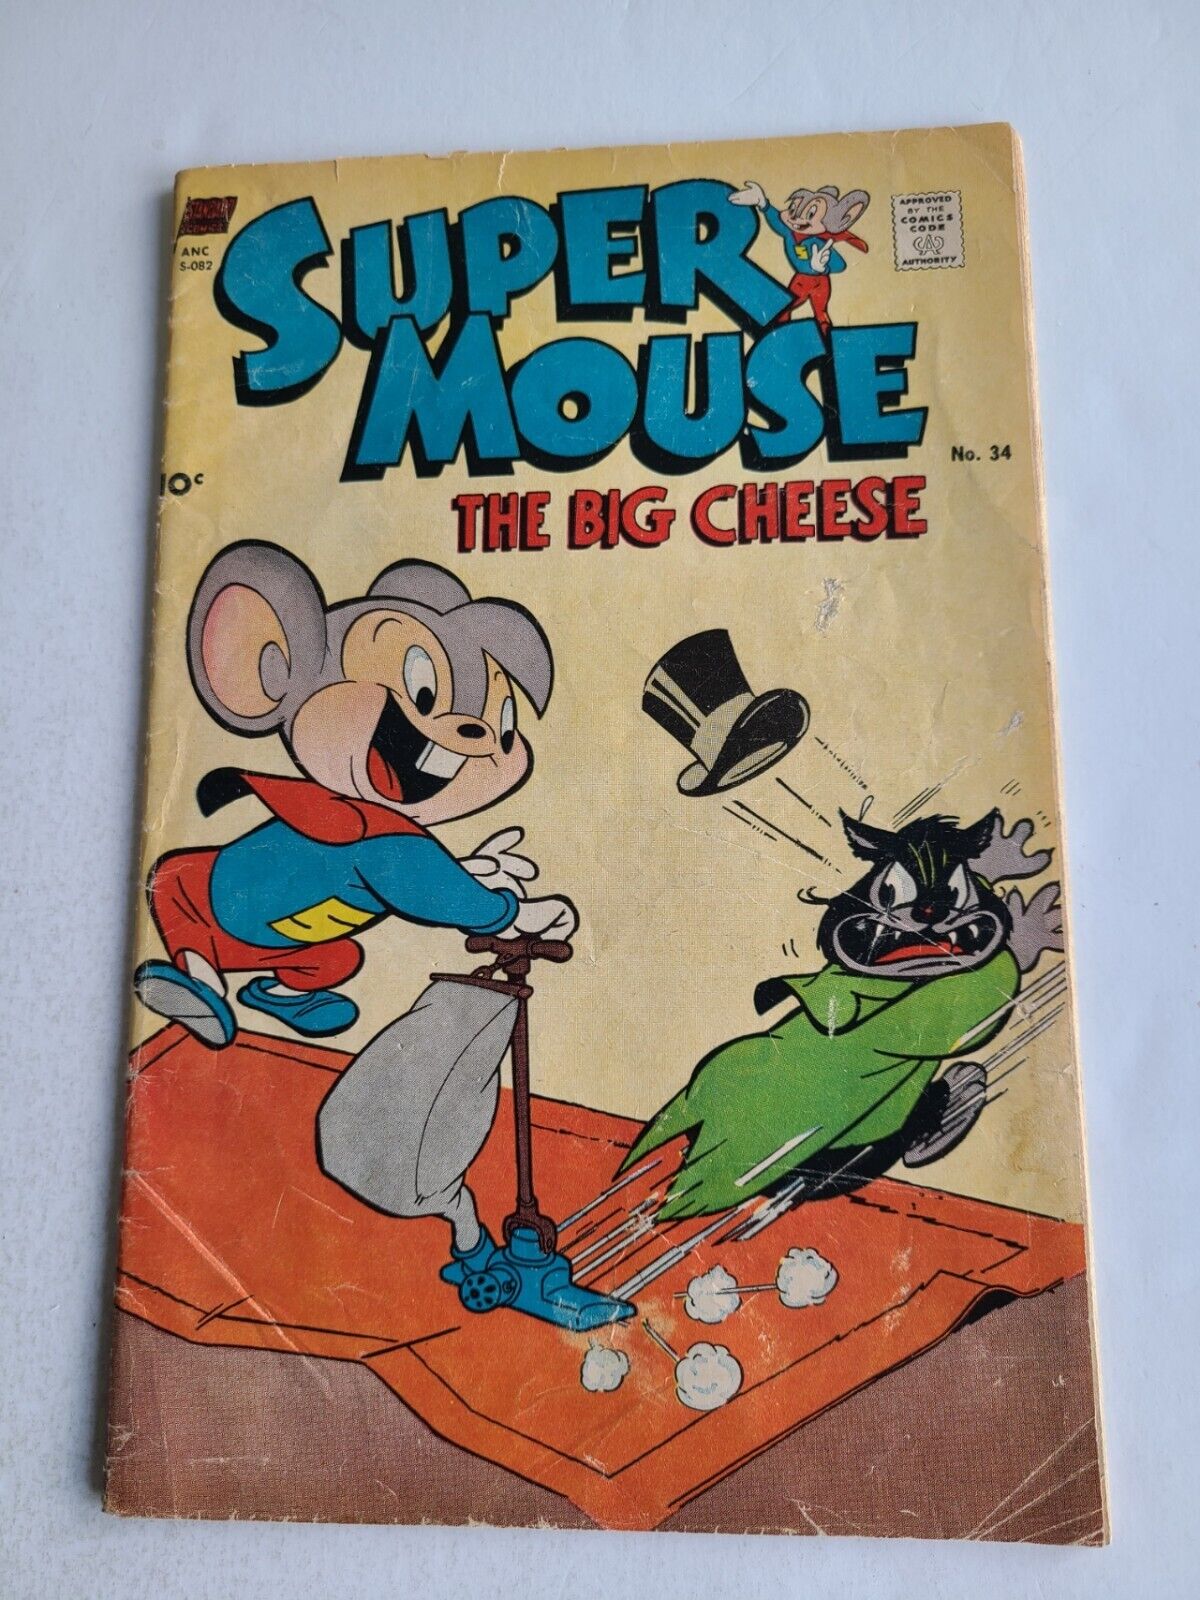 Supermouse: The Big Cheese #34, Standard 1955 Comic, (1955/114), VG 4.0